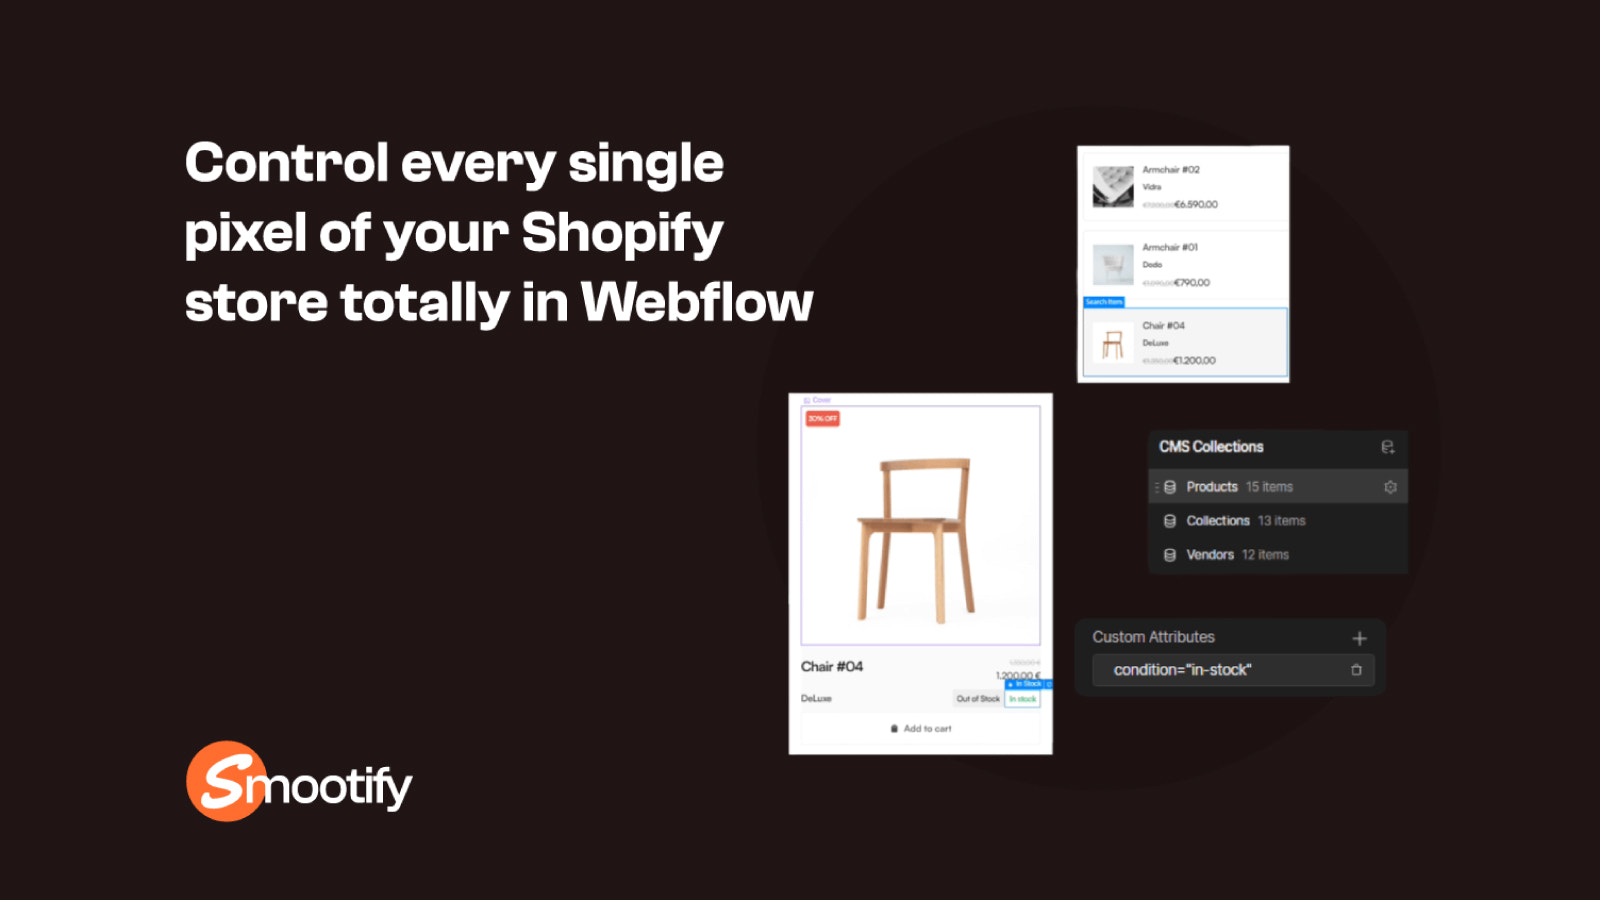 Ready to use Webflow components to create your Shopify store